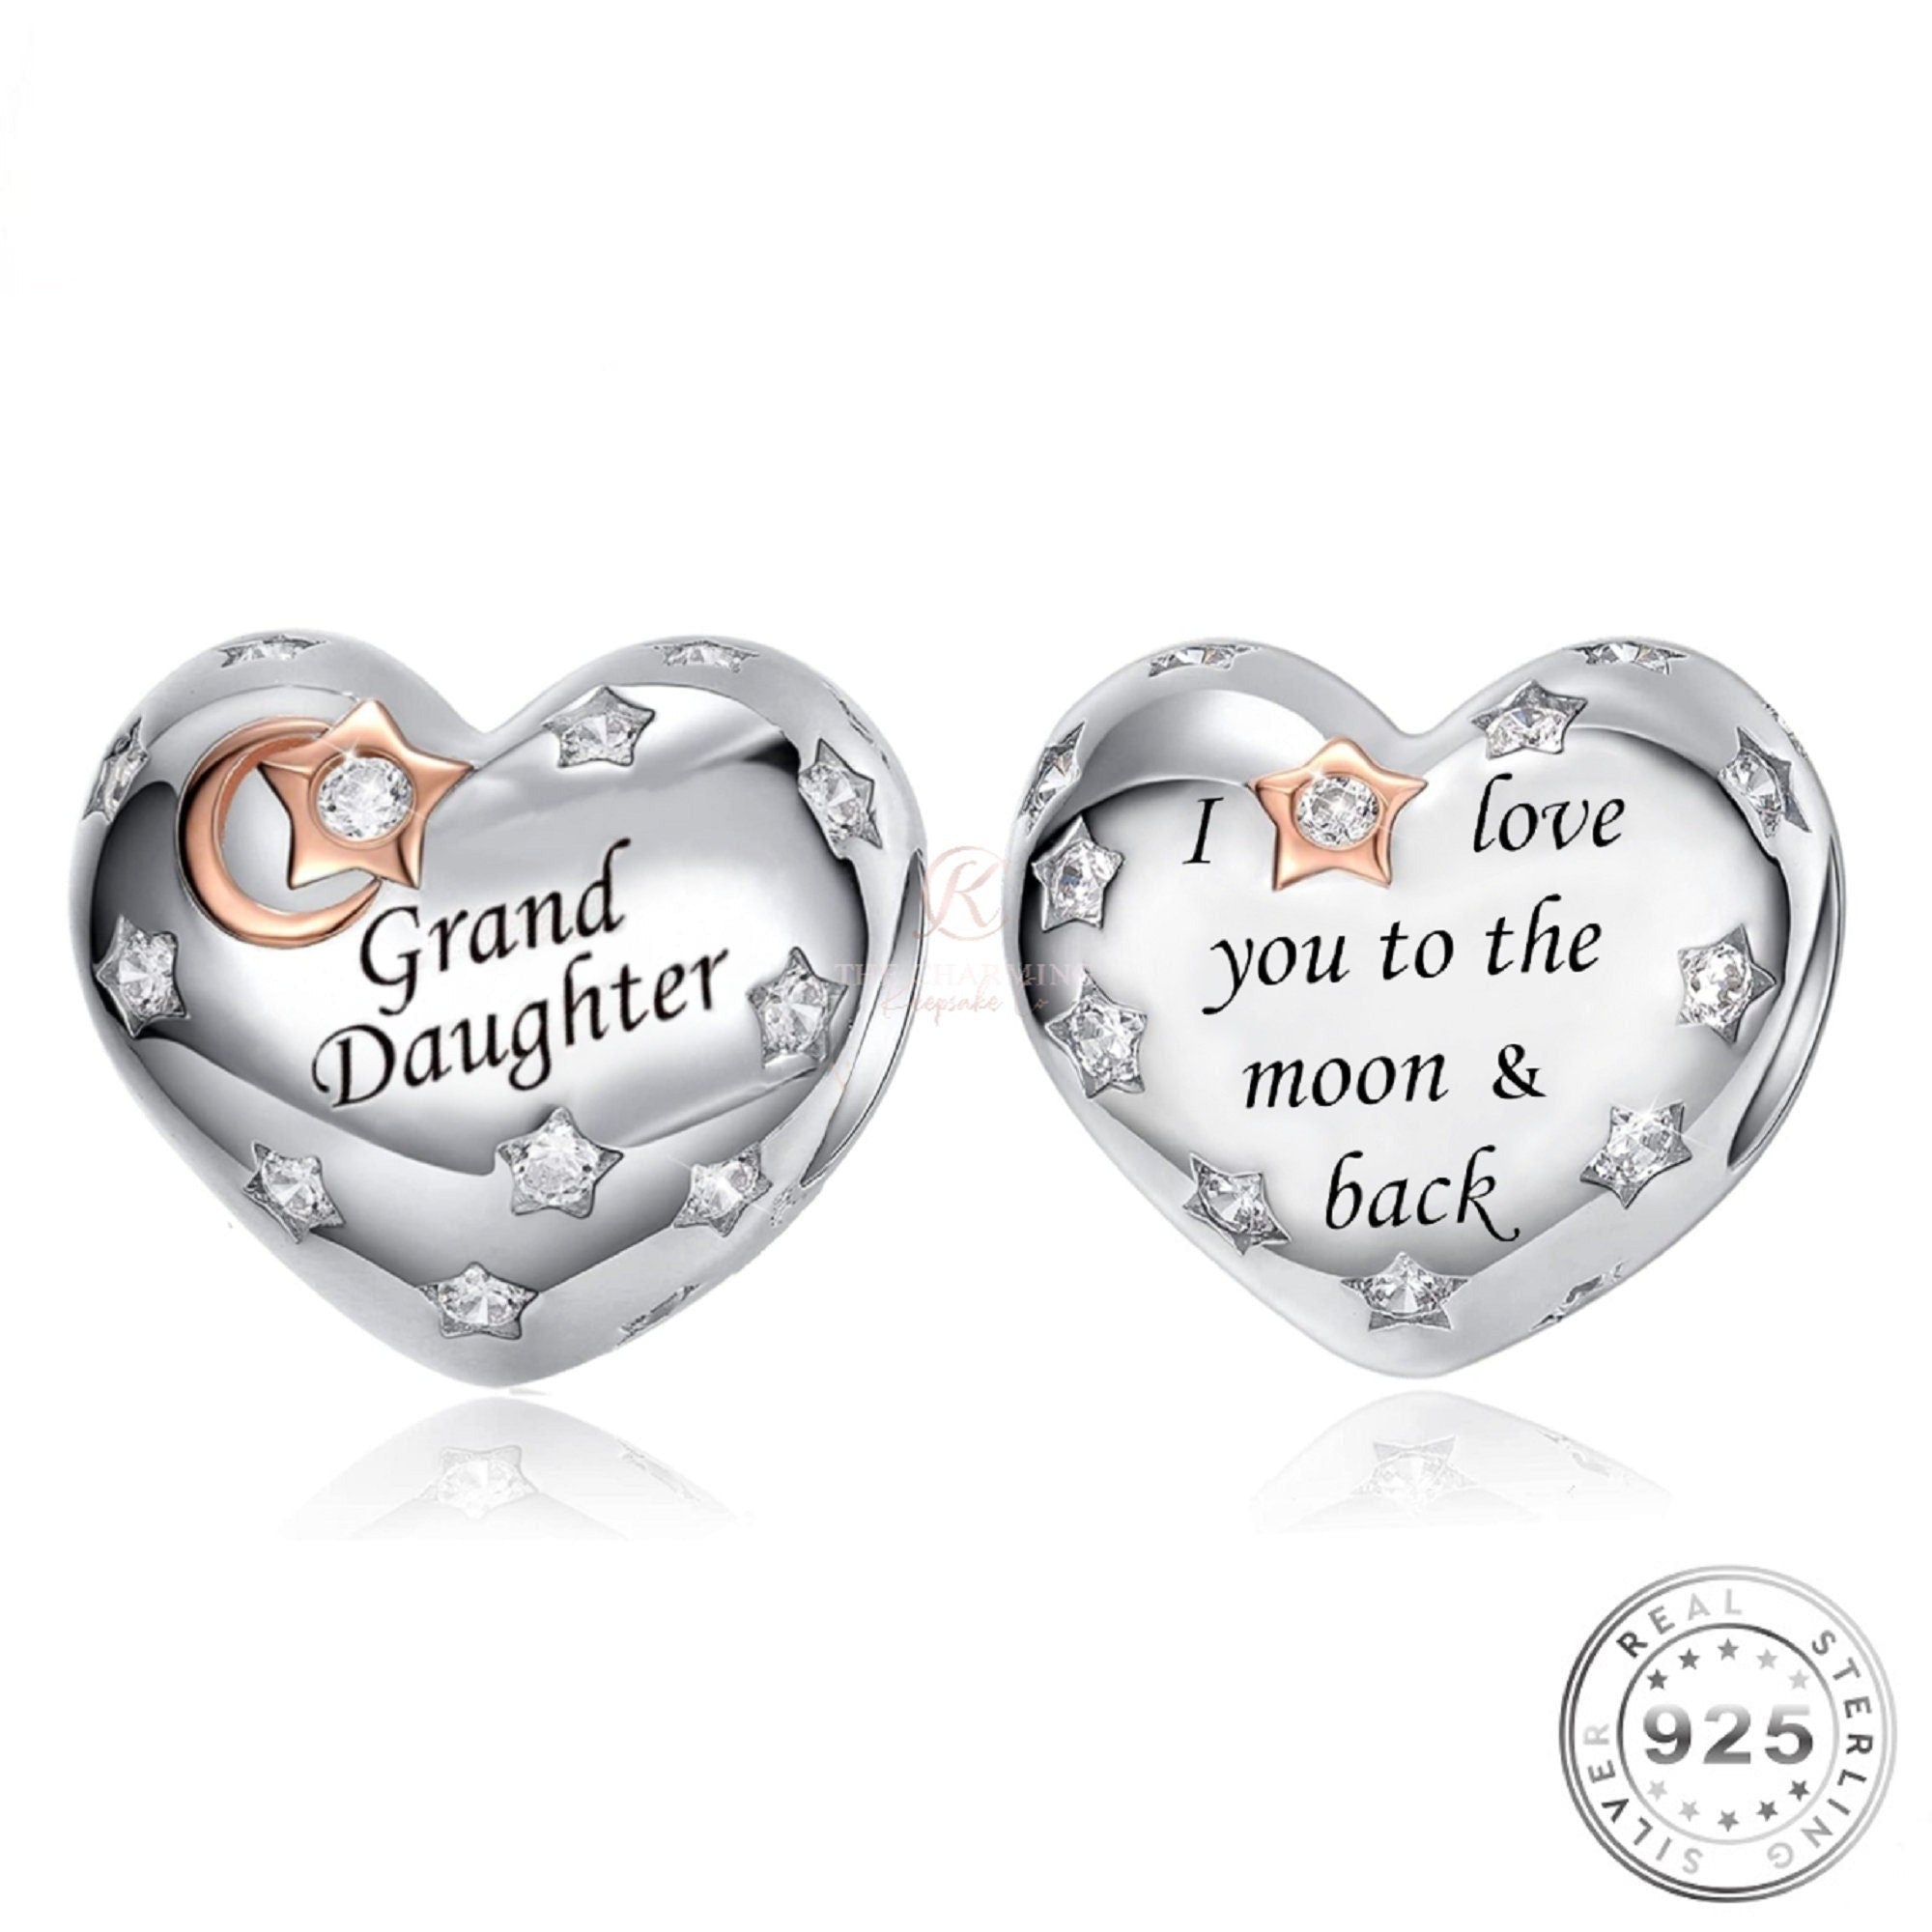 Grand Daughter Charm - Sterling Silver S925. Buy Now. – The Bee Charm